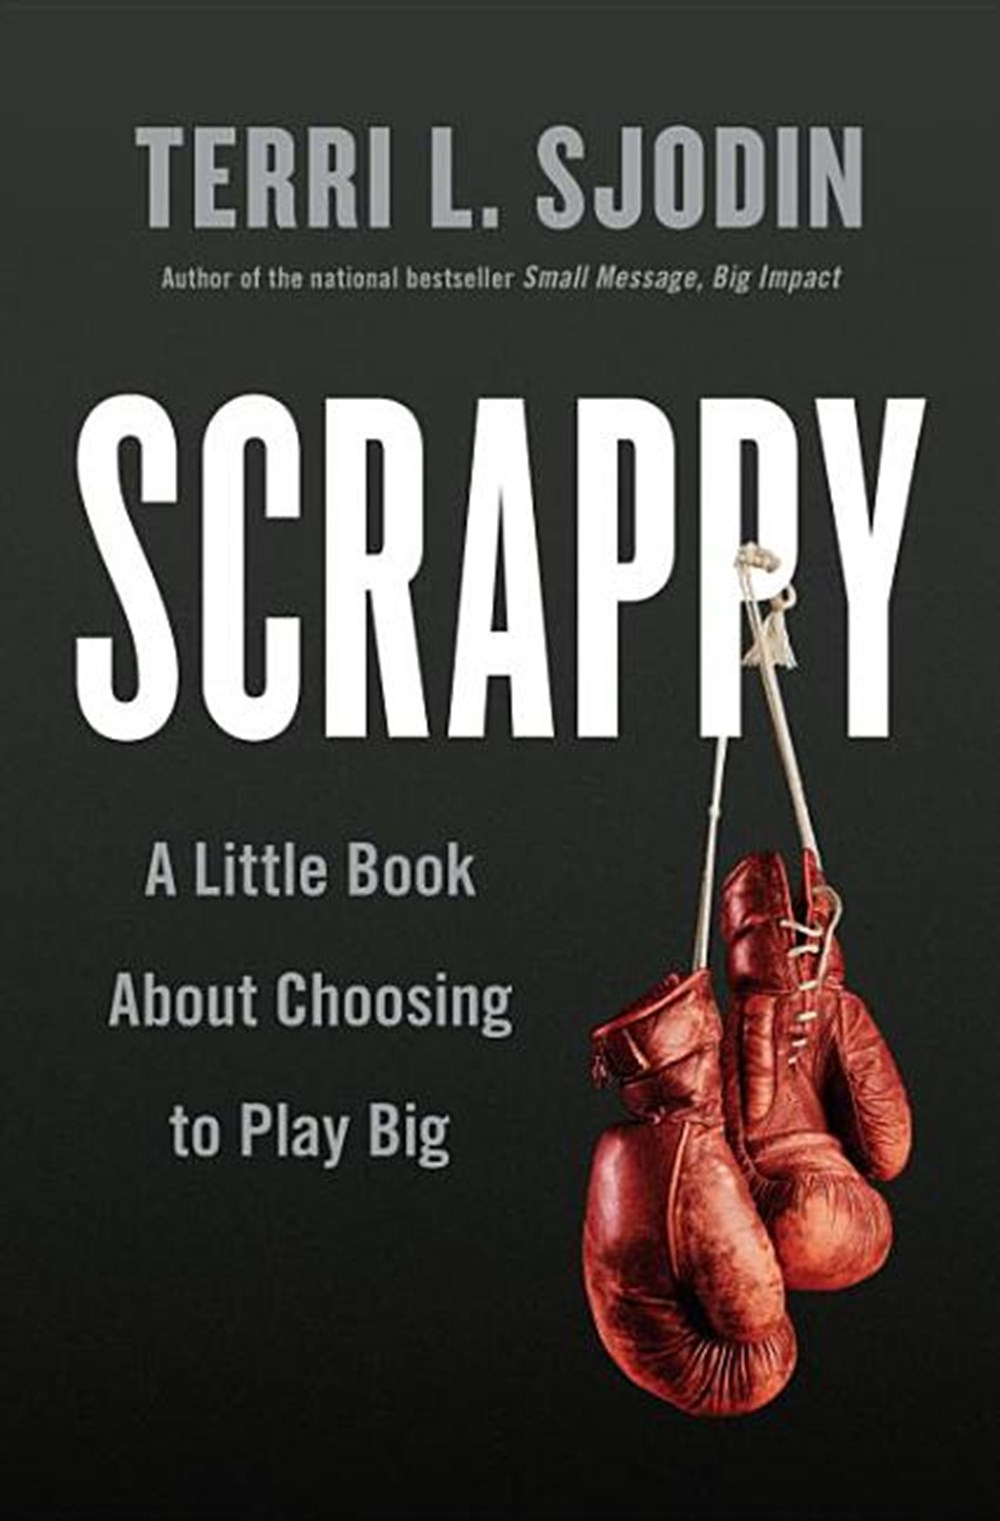 Scrappy A Little Book about Choosing to Play Big